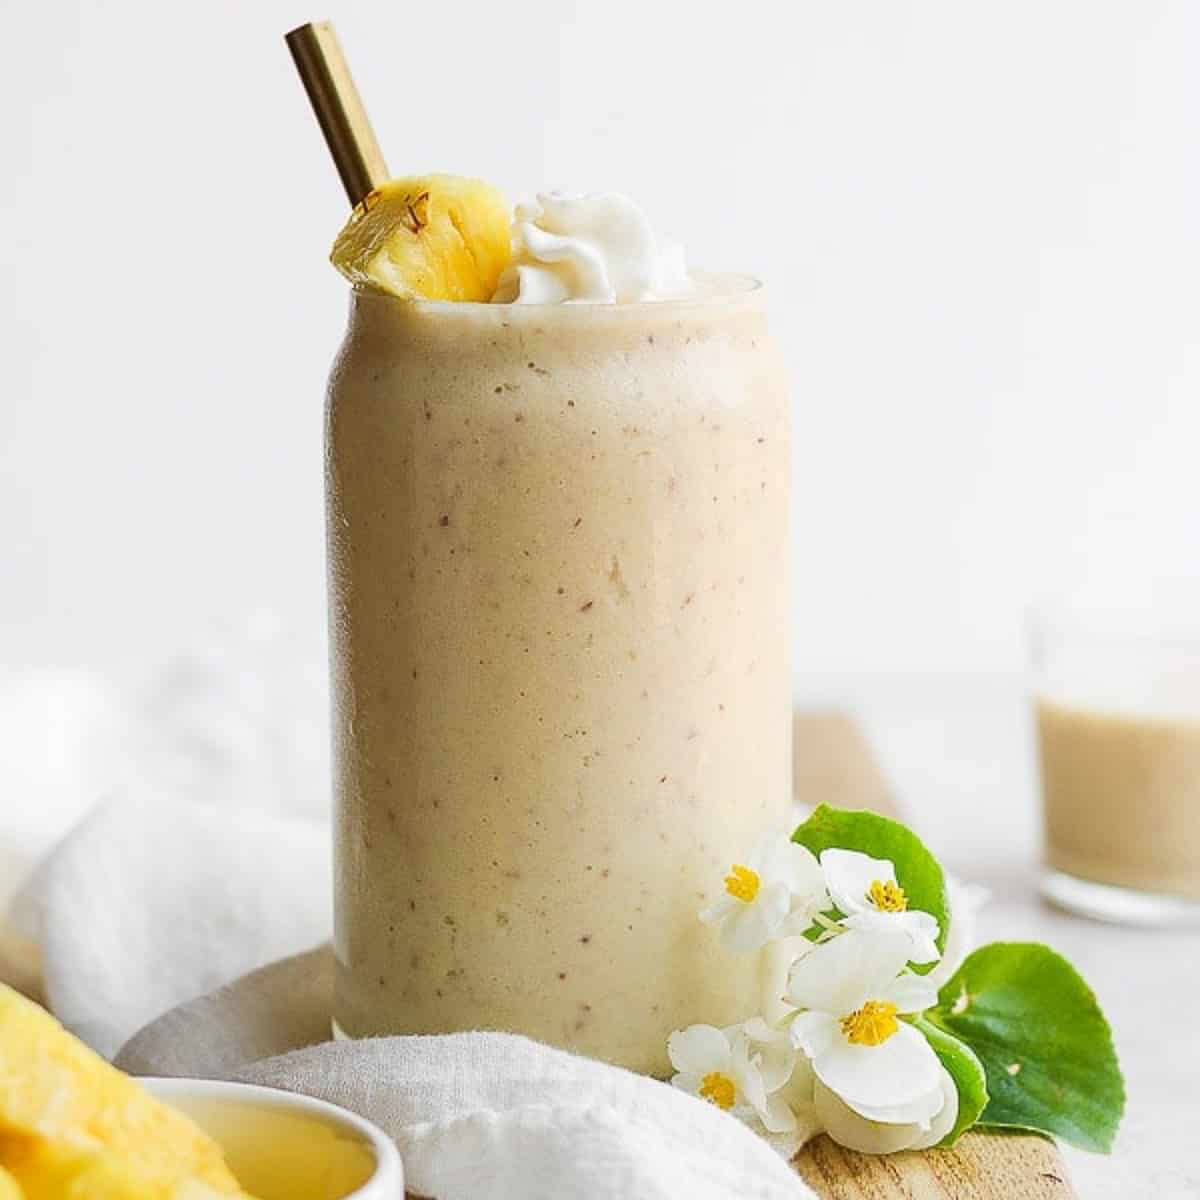 Recipe for a creamy pineapple smoothie.